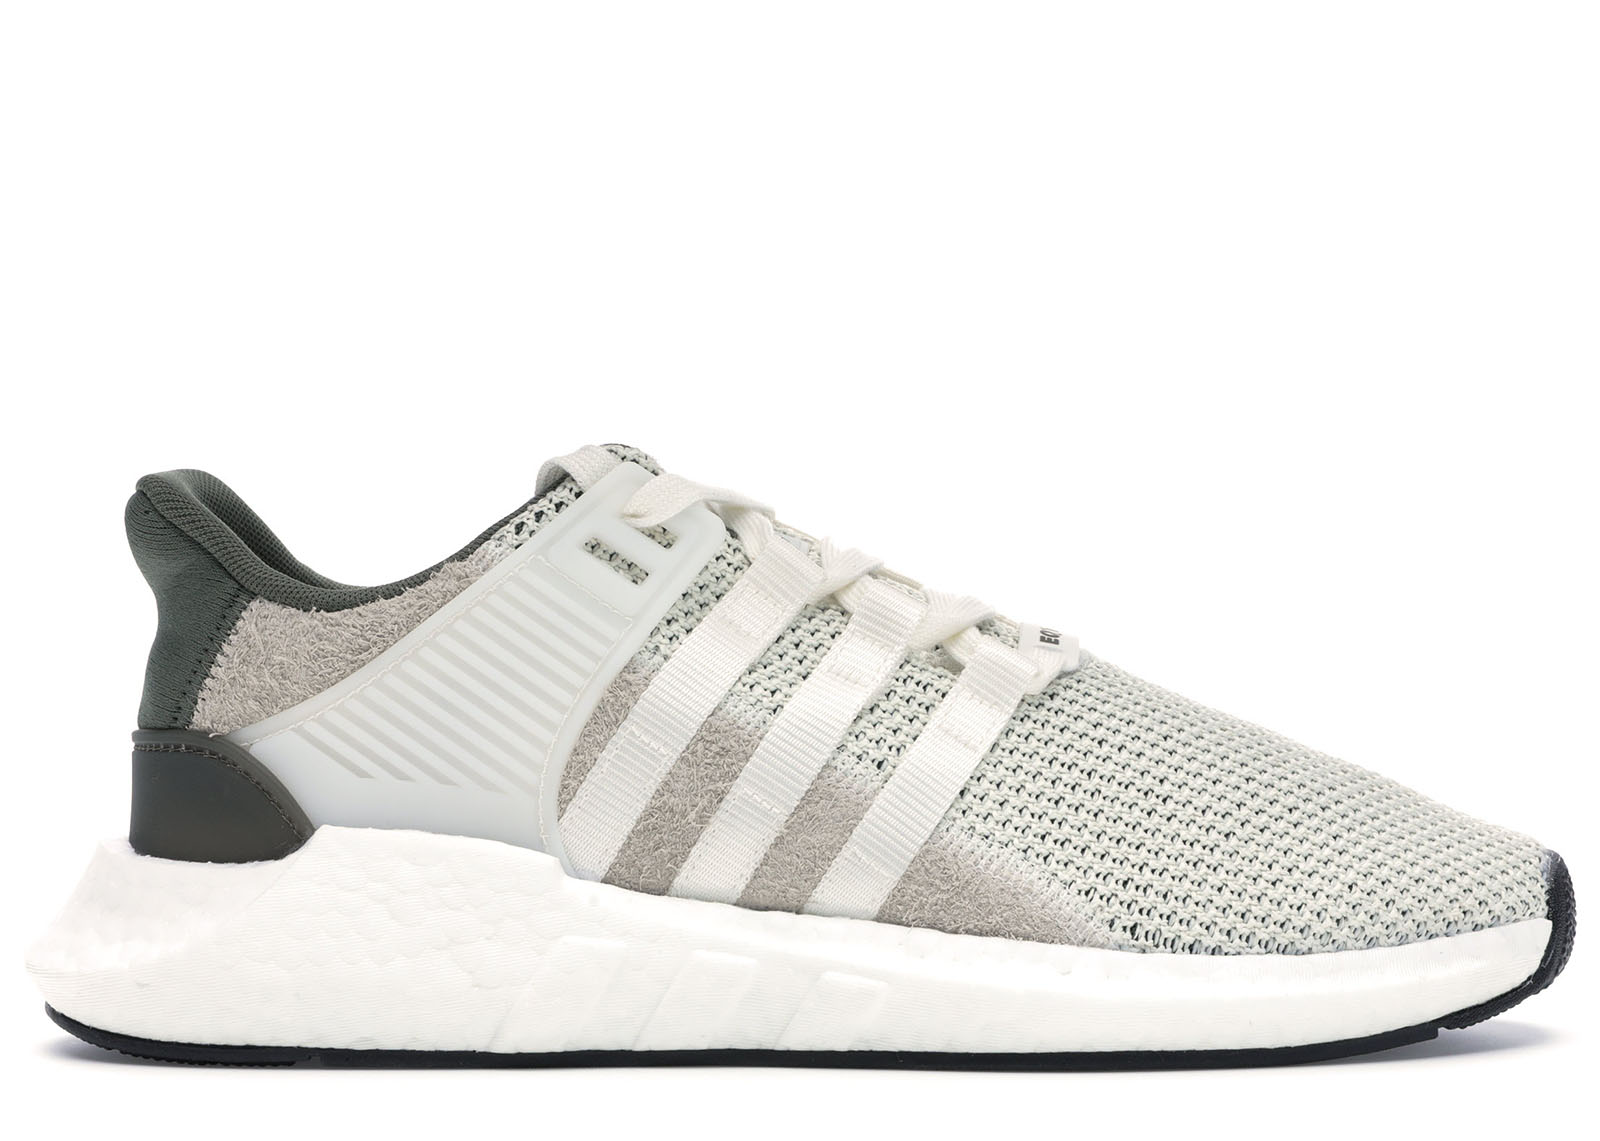 adidas EQT Support 93/17 Off White - BY9510